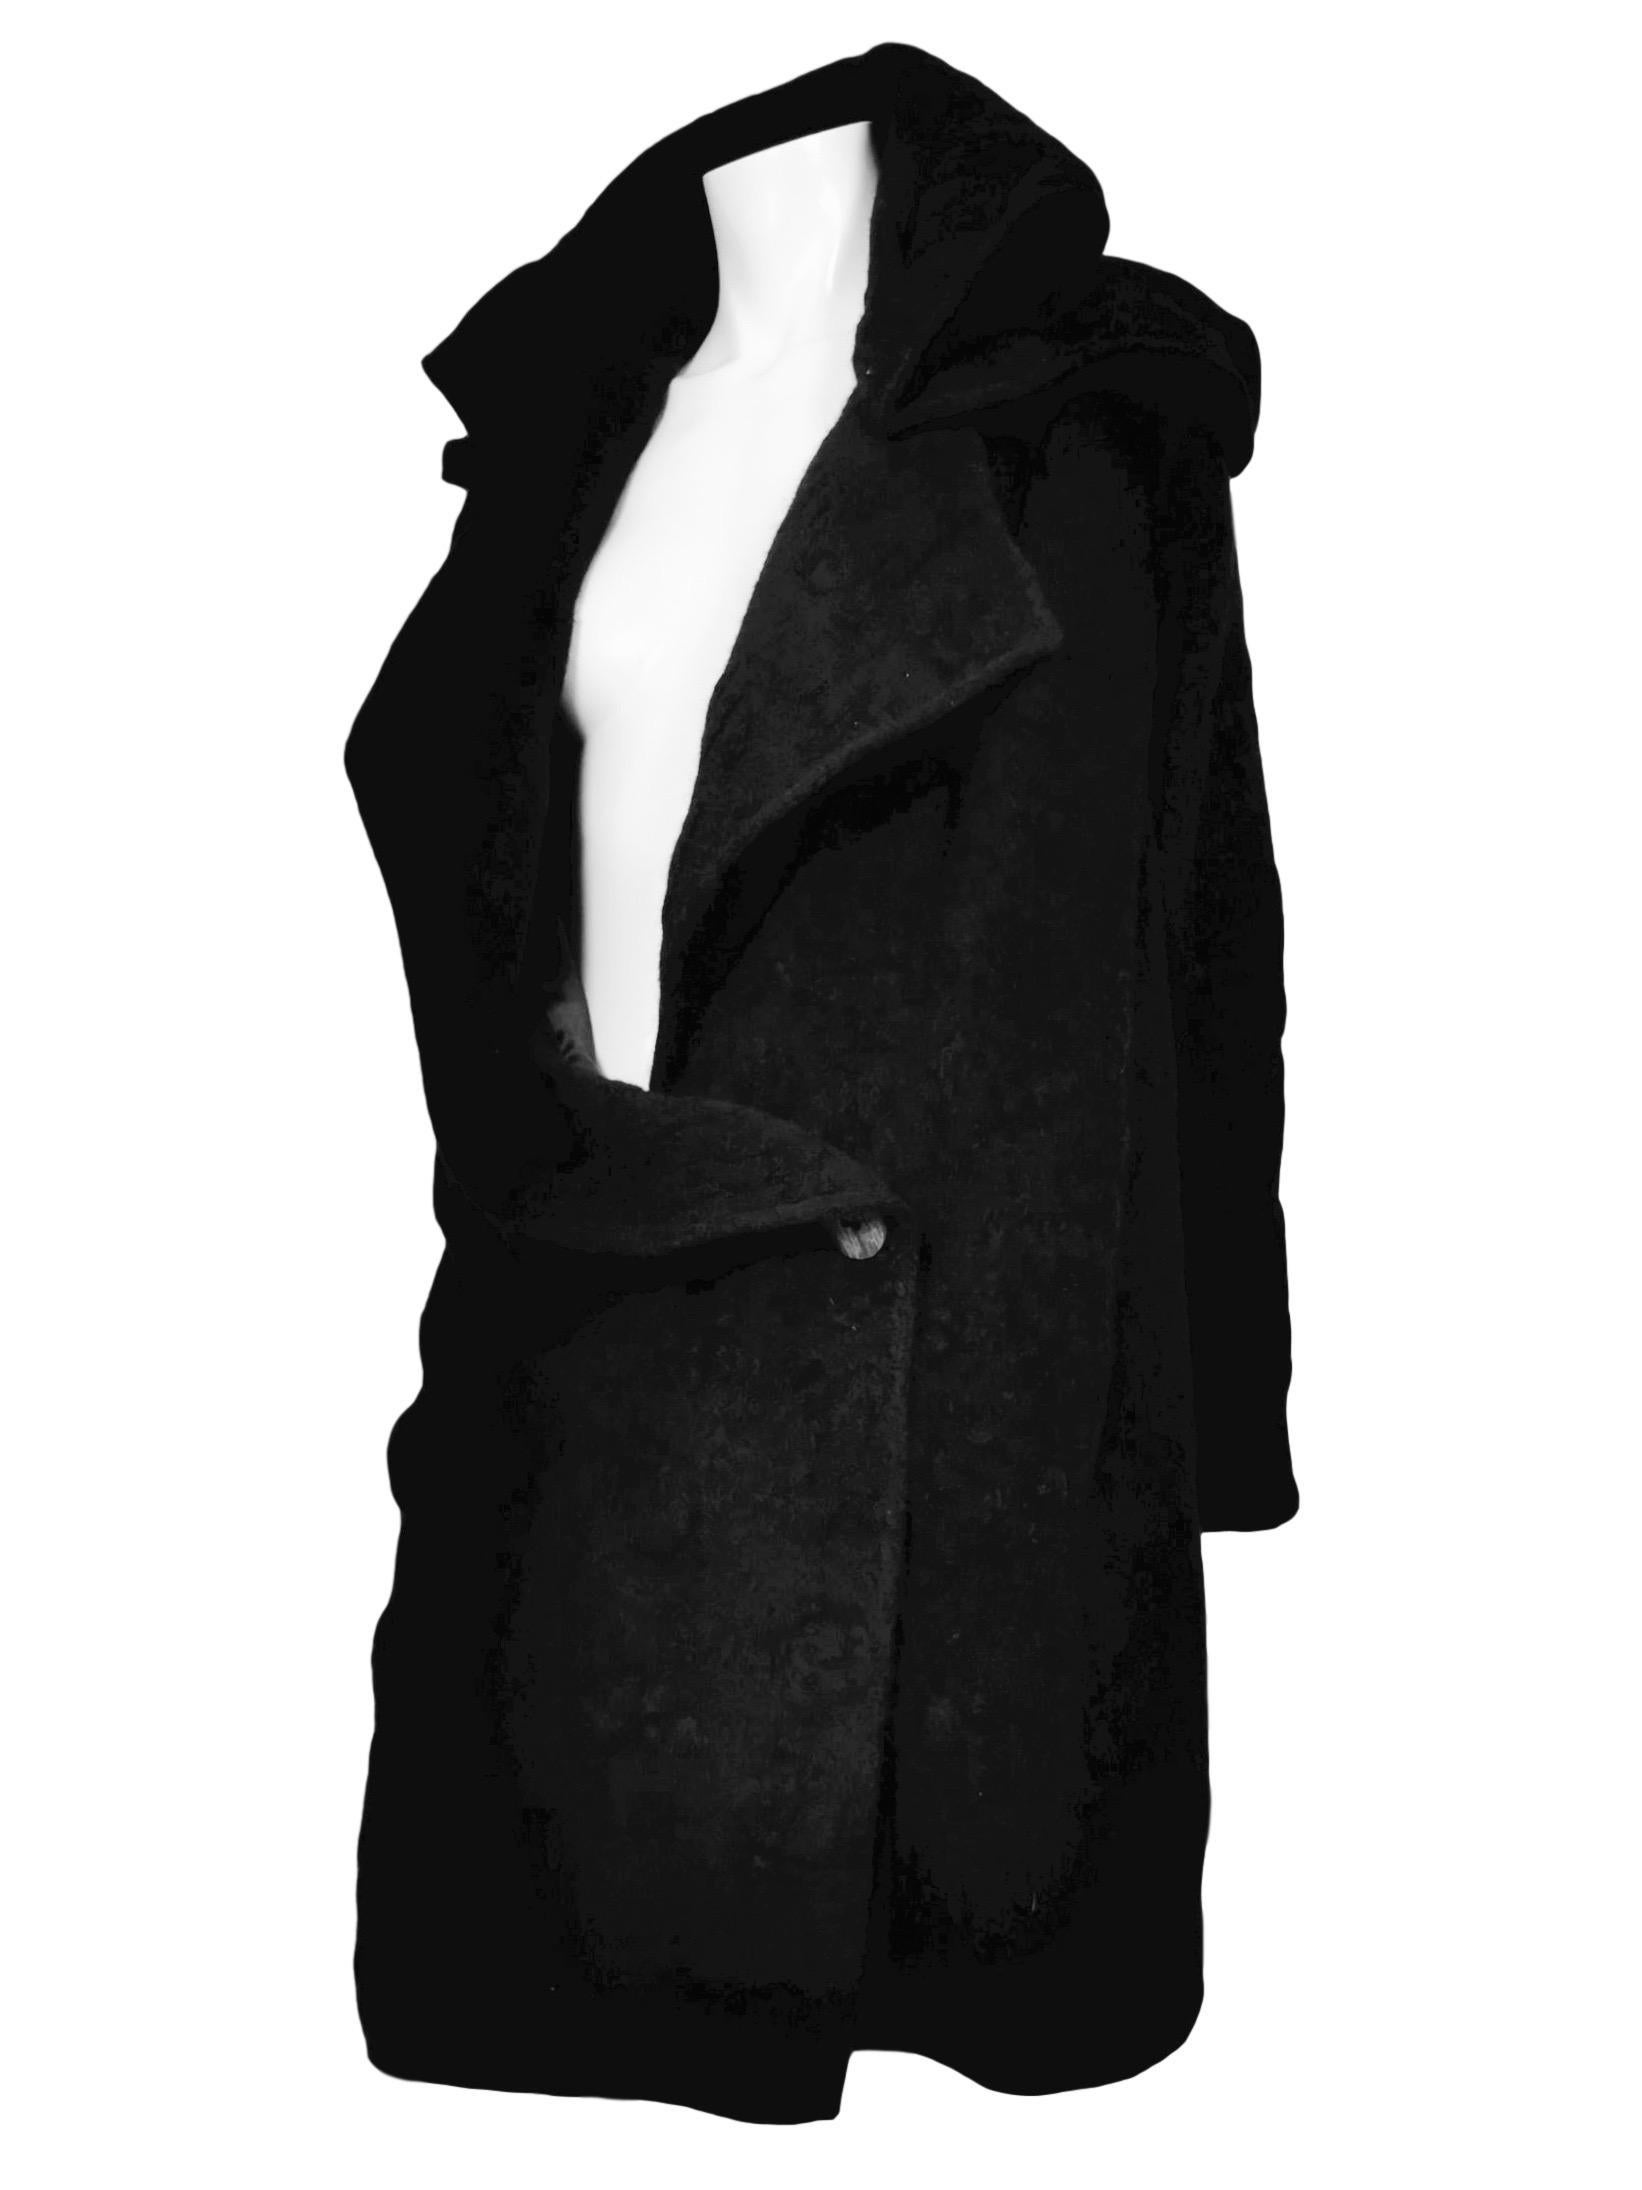 John Galliano Fall/Winter 2000 Oversize Slouchy Textured Wool and Mohair Coat For Sale 3